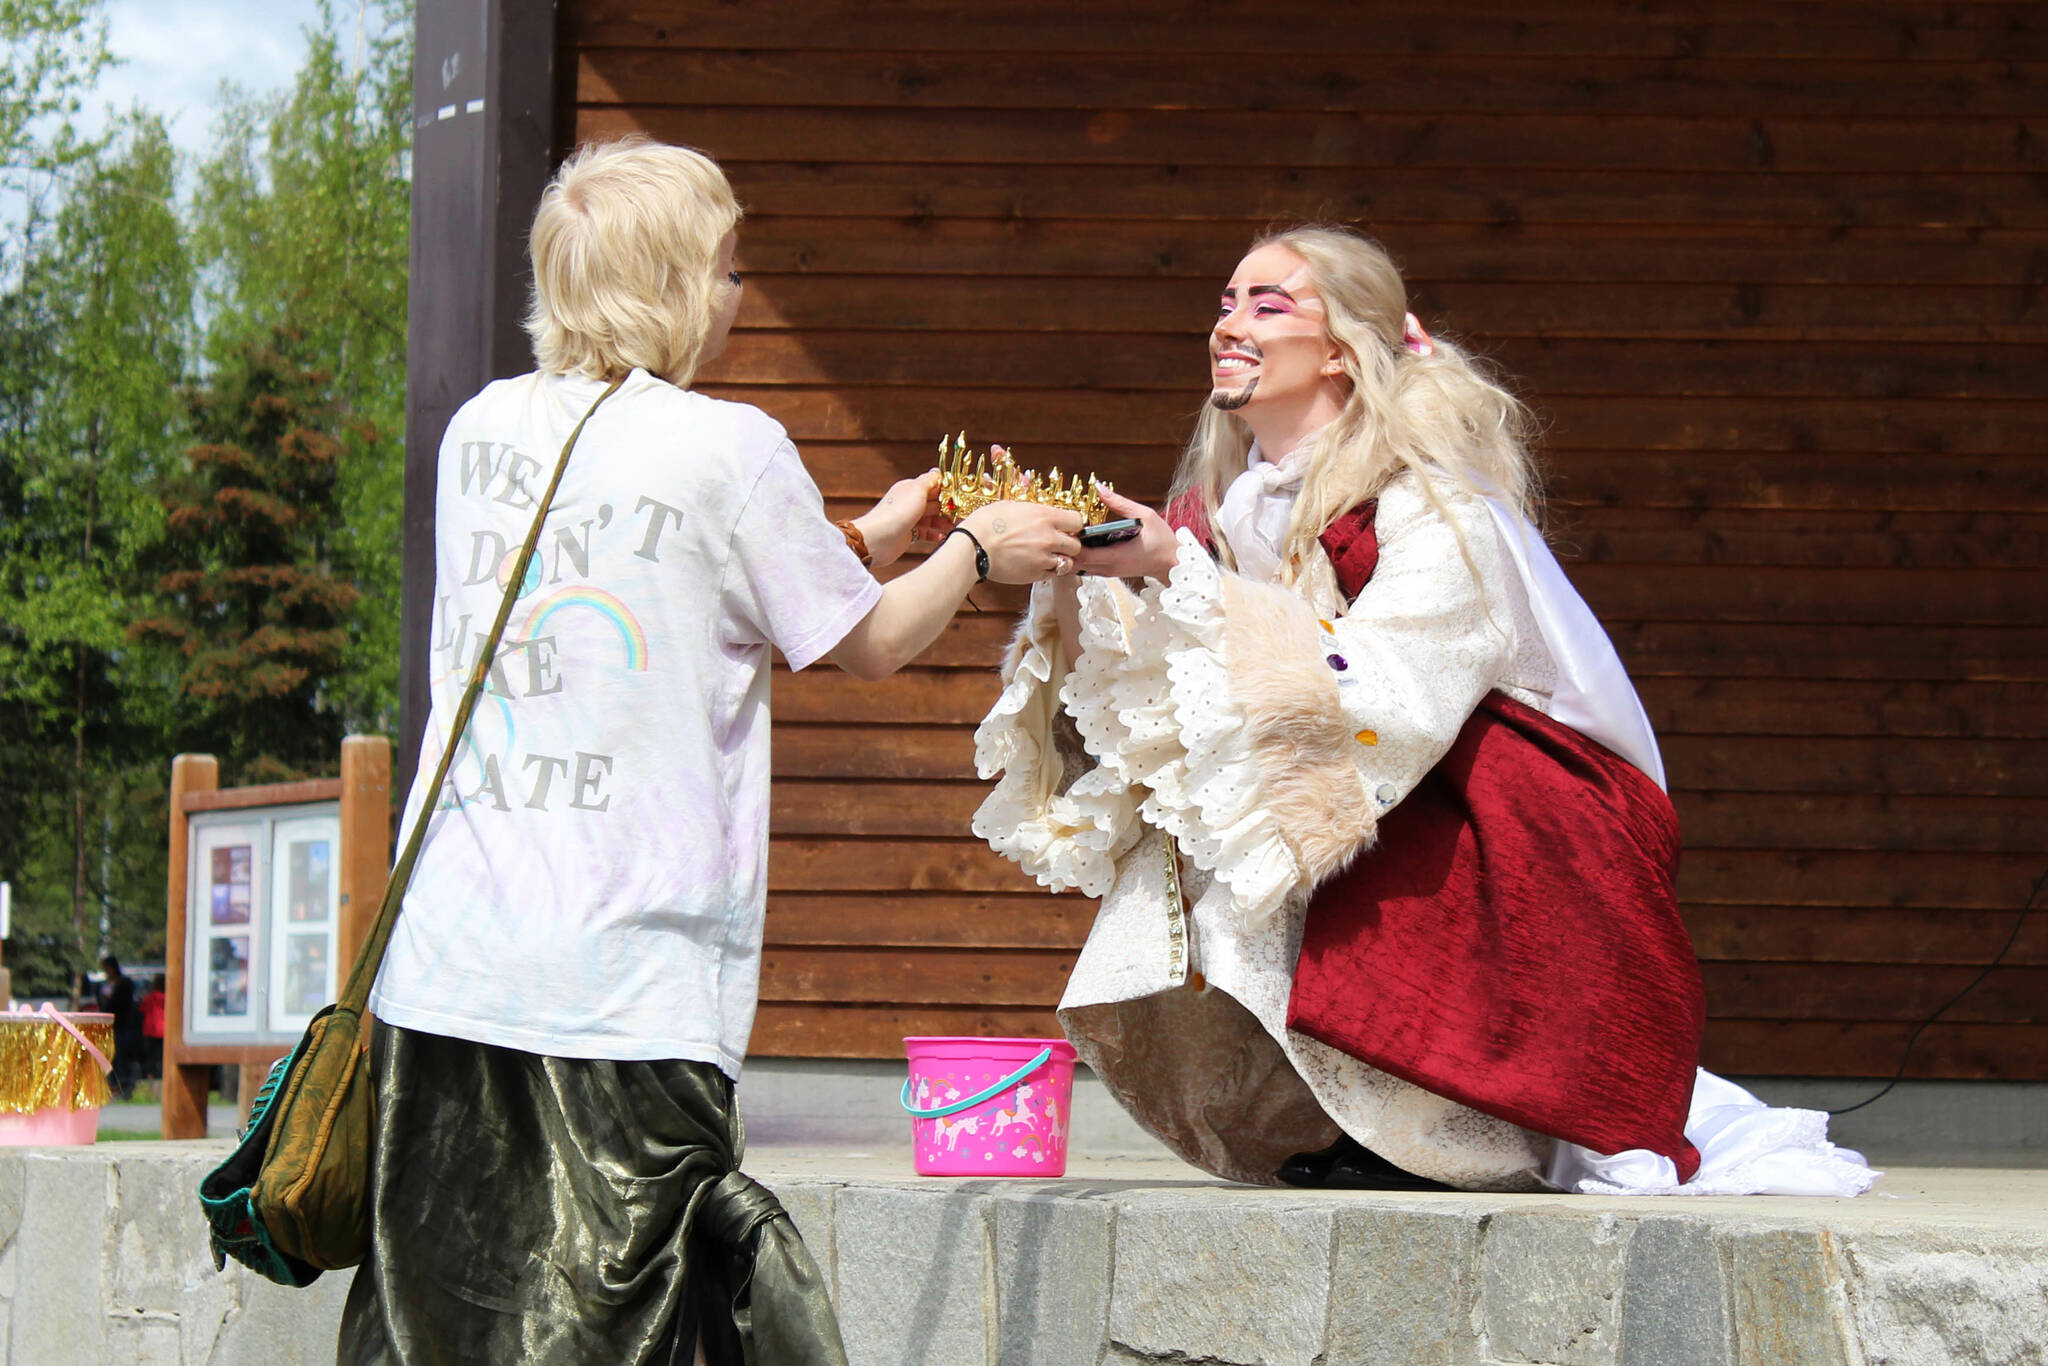 Drag performer Jasper Dragful accepts a crown after speaking about the history of drag during Soldotna Pride in the Park on Saturday, June 3, 2023 in Soldotna, Alaska. (Ashlyn O’Hara/Peninsula Clarion)